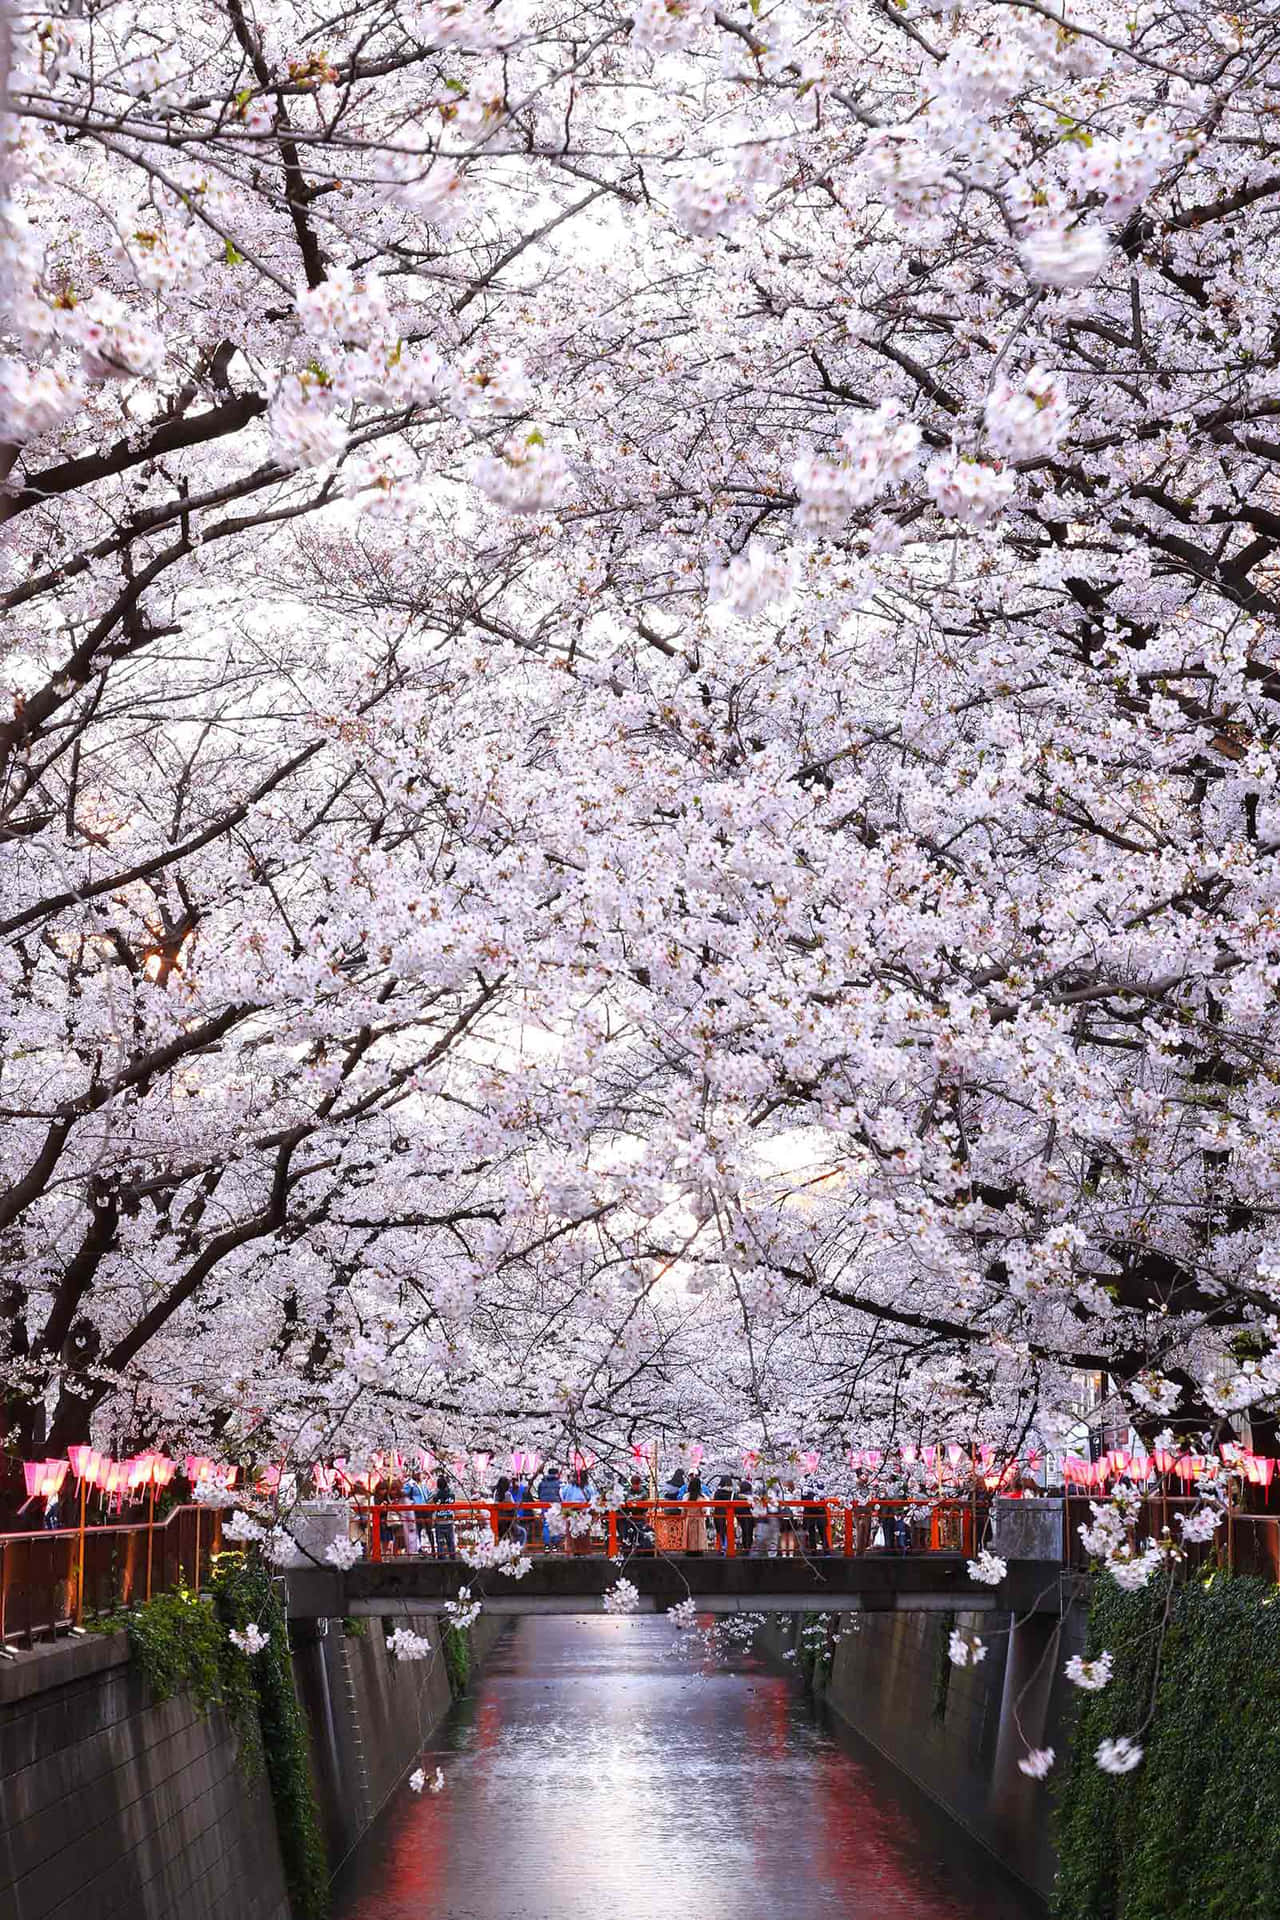 Captivating Cherry Blossoms along a River in Japan